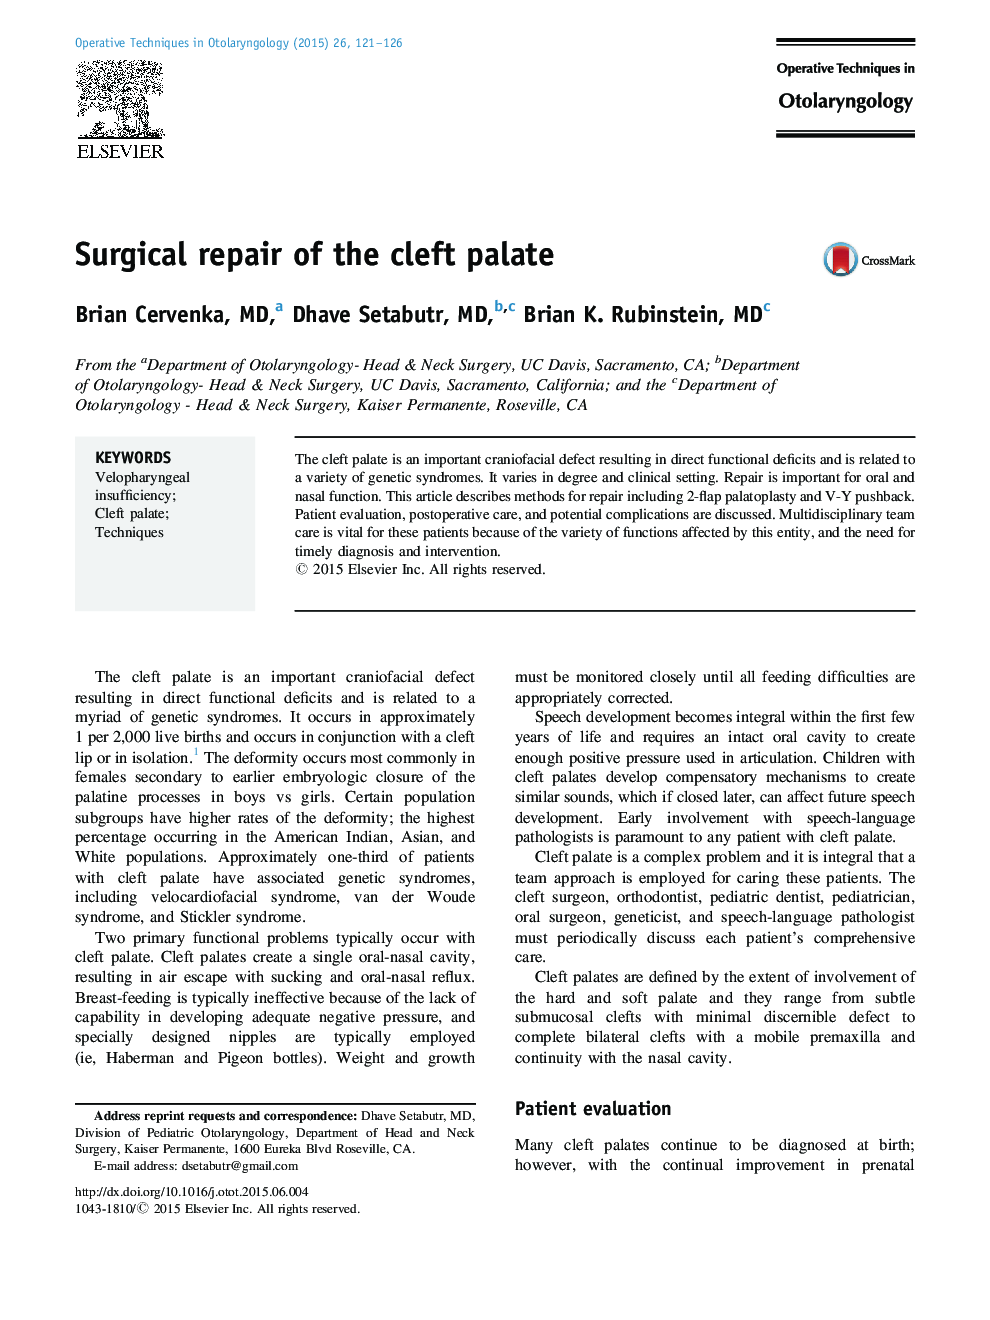 Surgical repair of the cleft palate